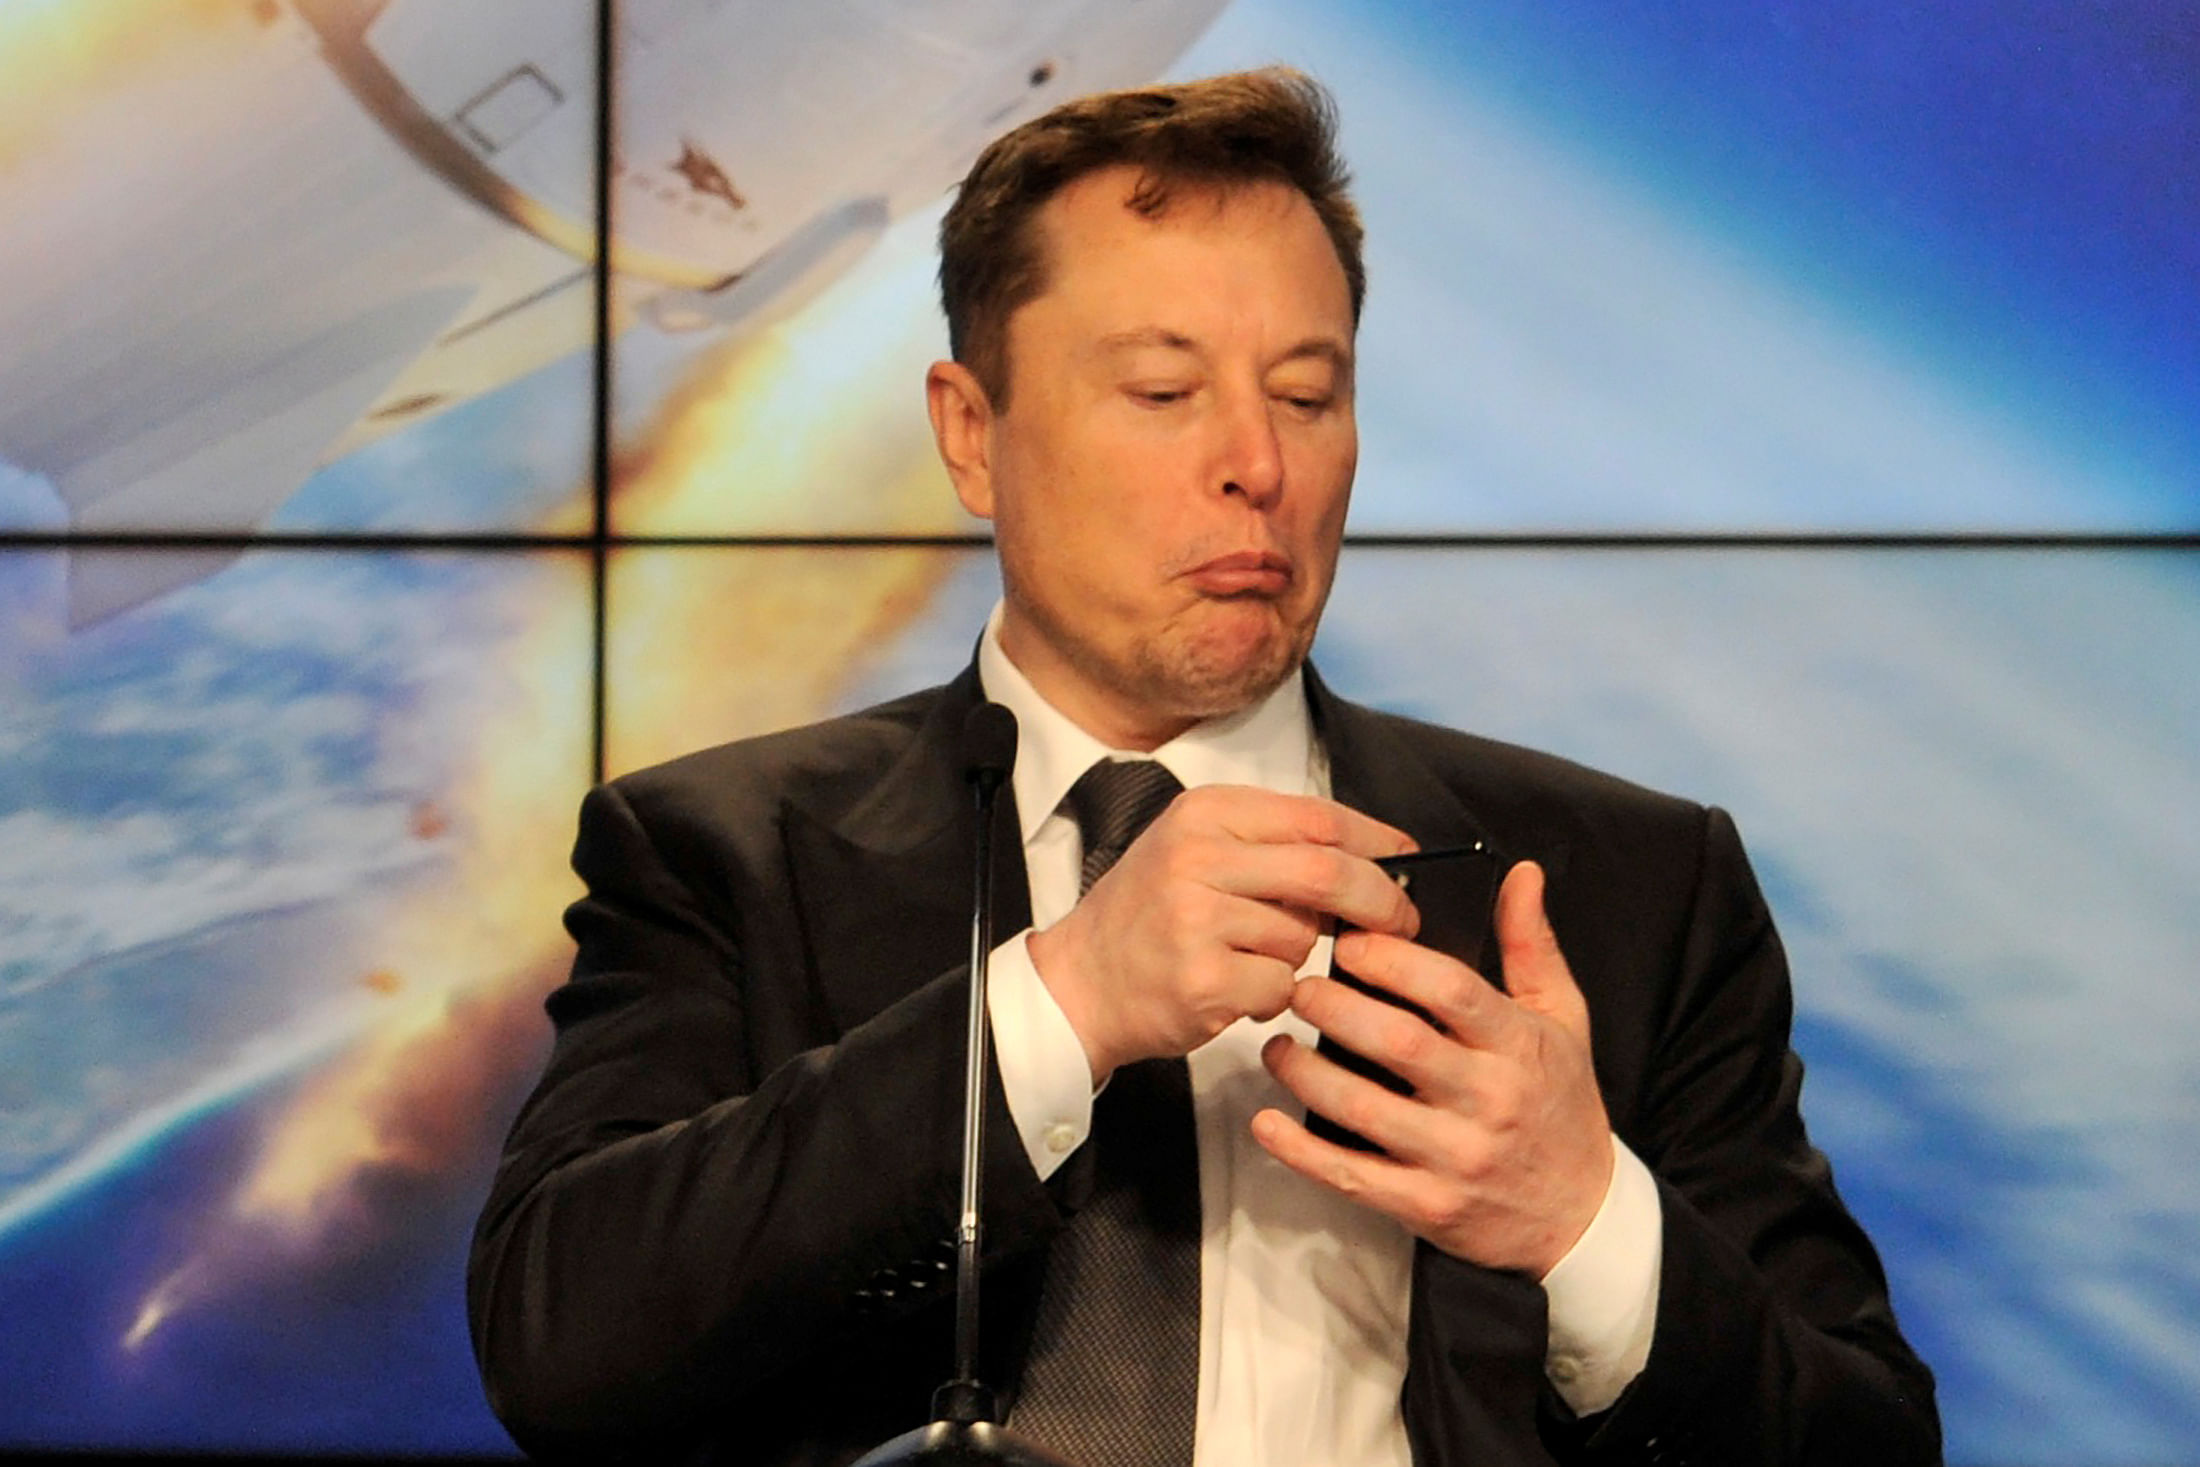 SpaceX founder and chief engineer Elon Musk. Credit: Reuters File Photo